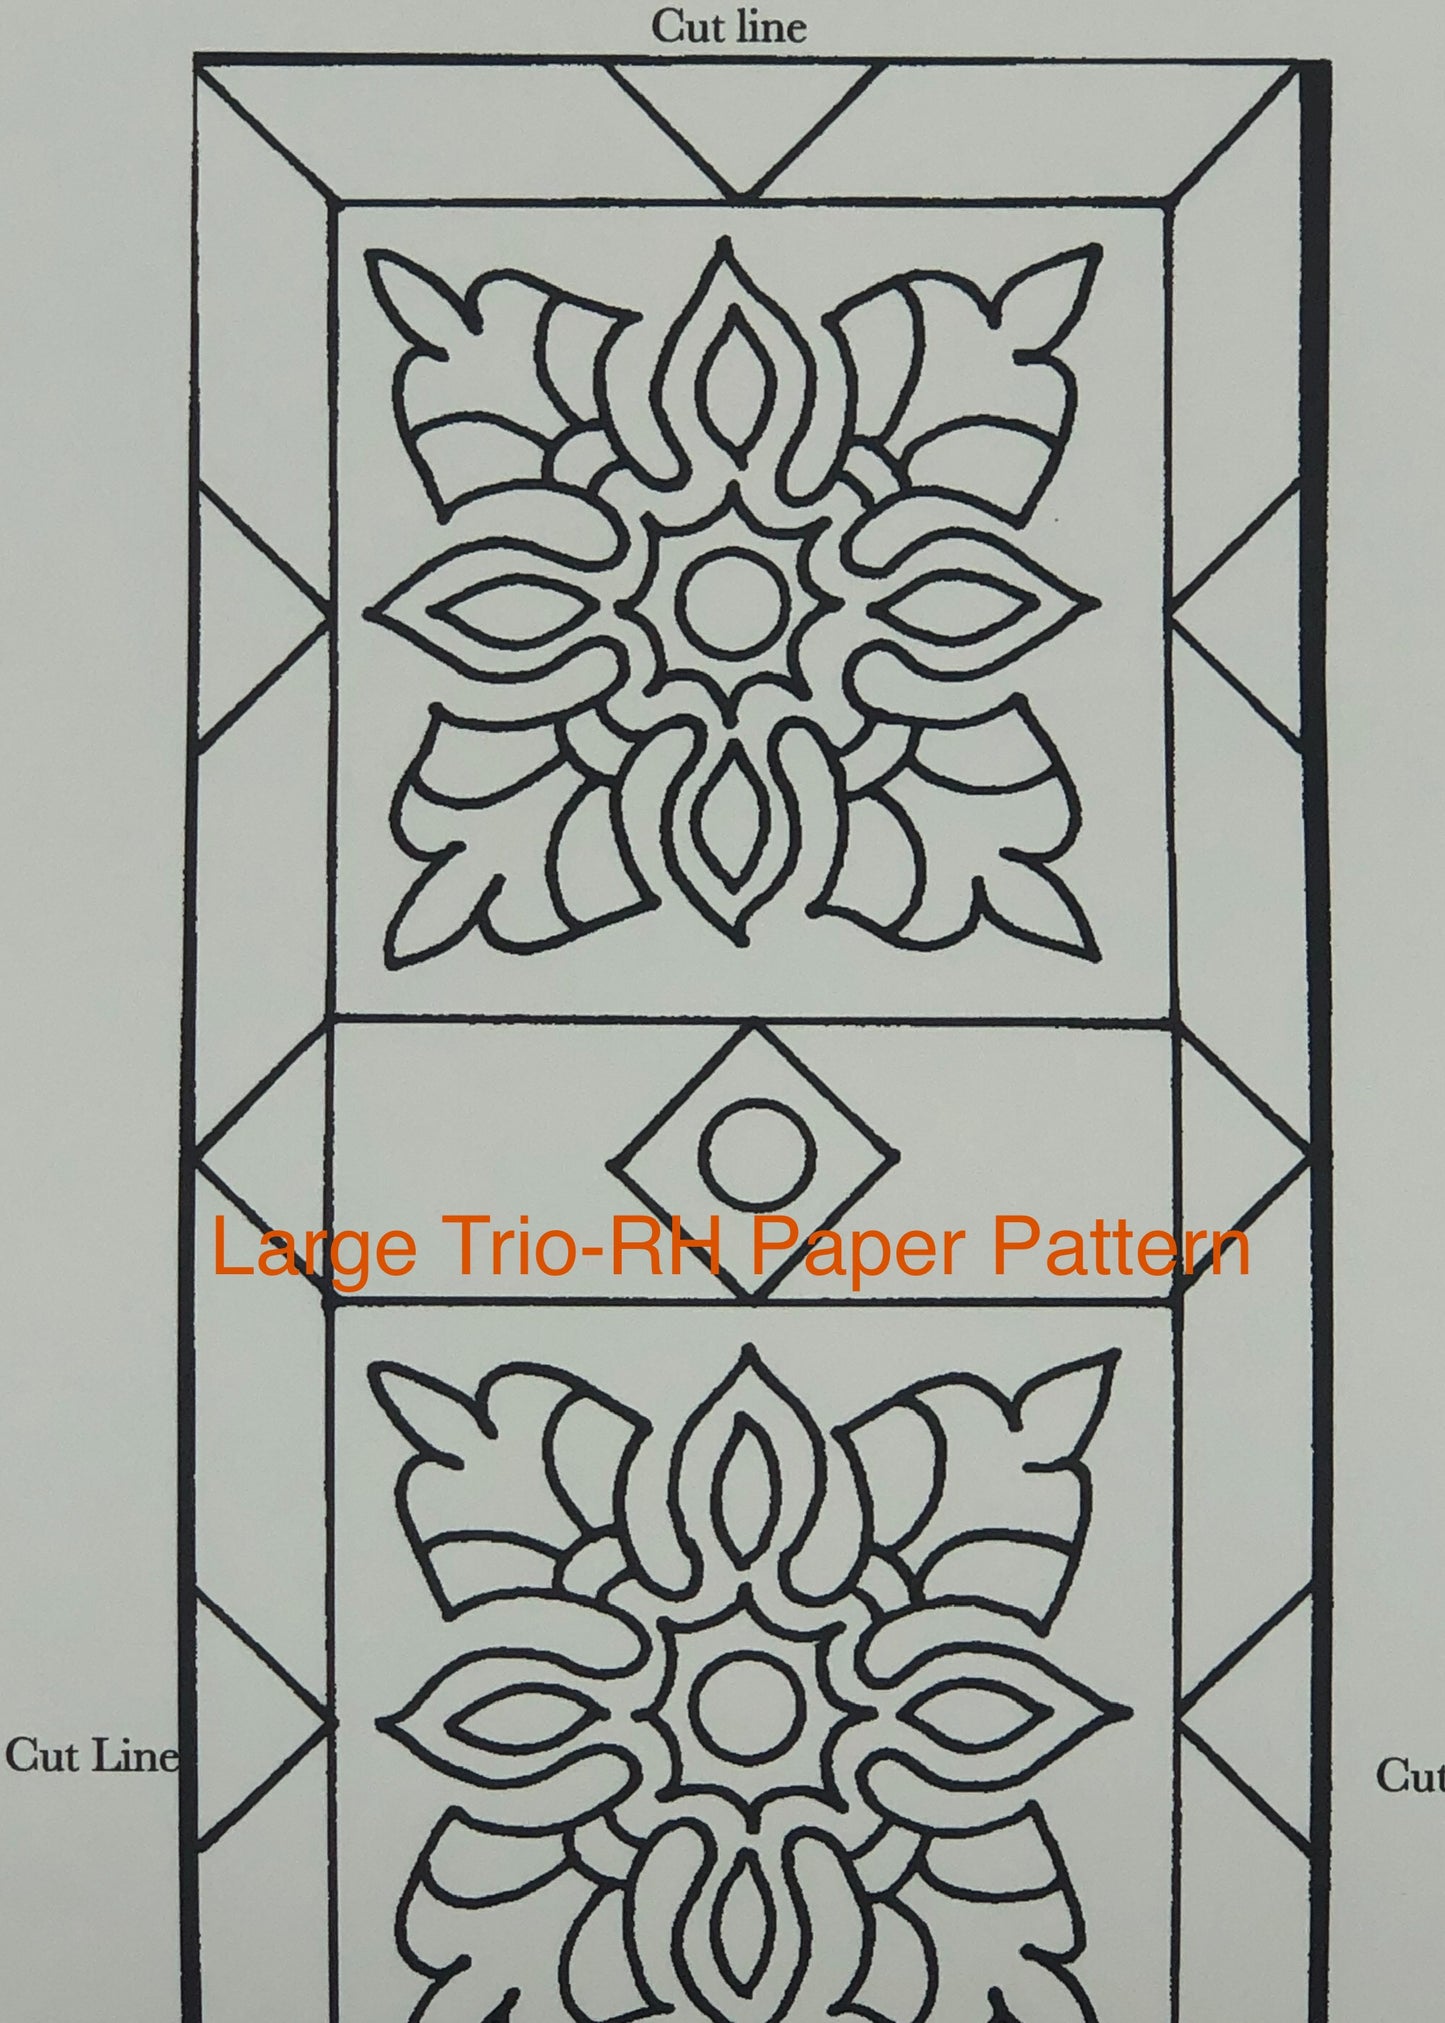 Large Trio- Paper Rug Hooking or Rug Punch Needle Pattern by Orphaned Wool. This pattern makes a wonderful table runner or floor runner rug. Paper Pattern was designed to be enlarged and allows you to customize the size pattern you want to create.